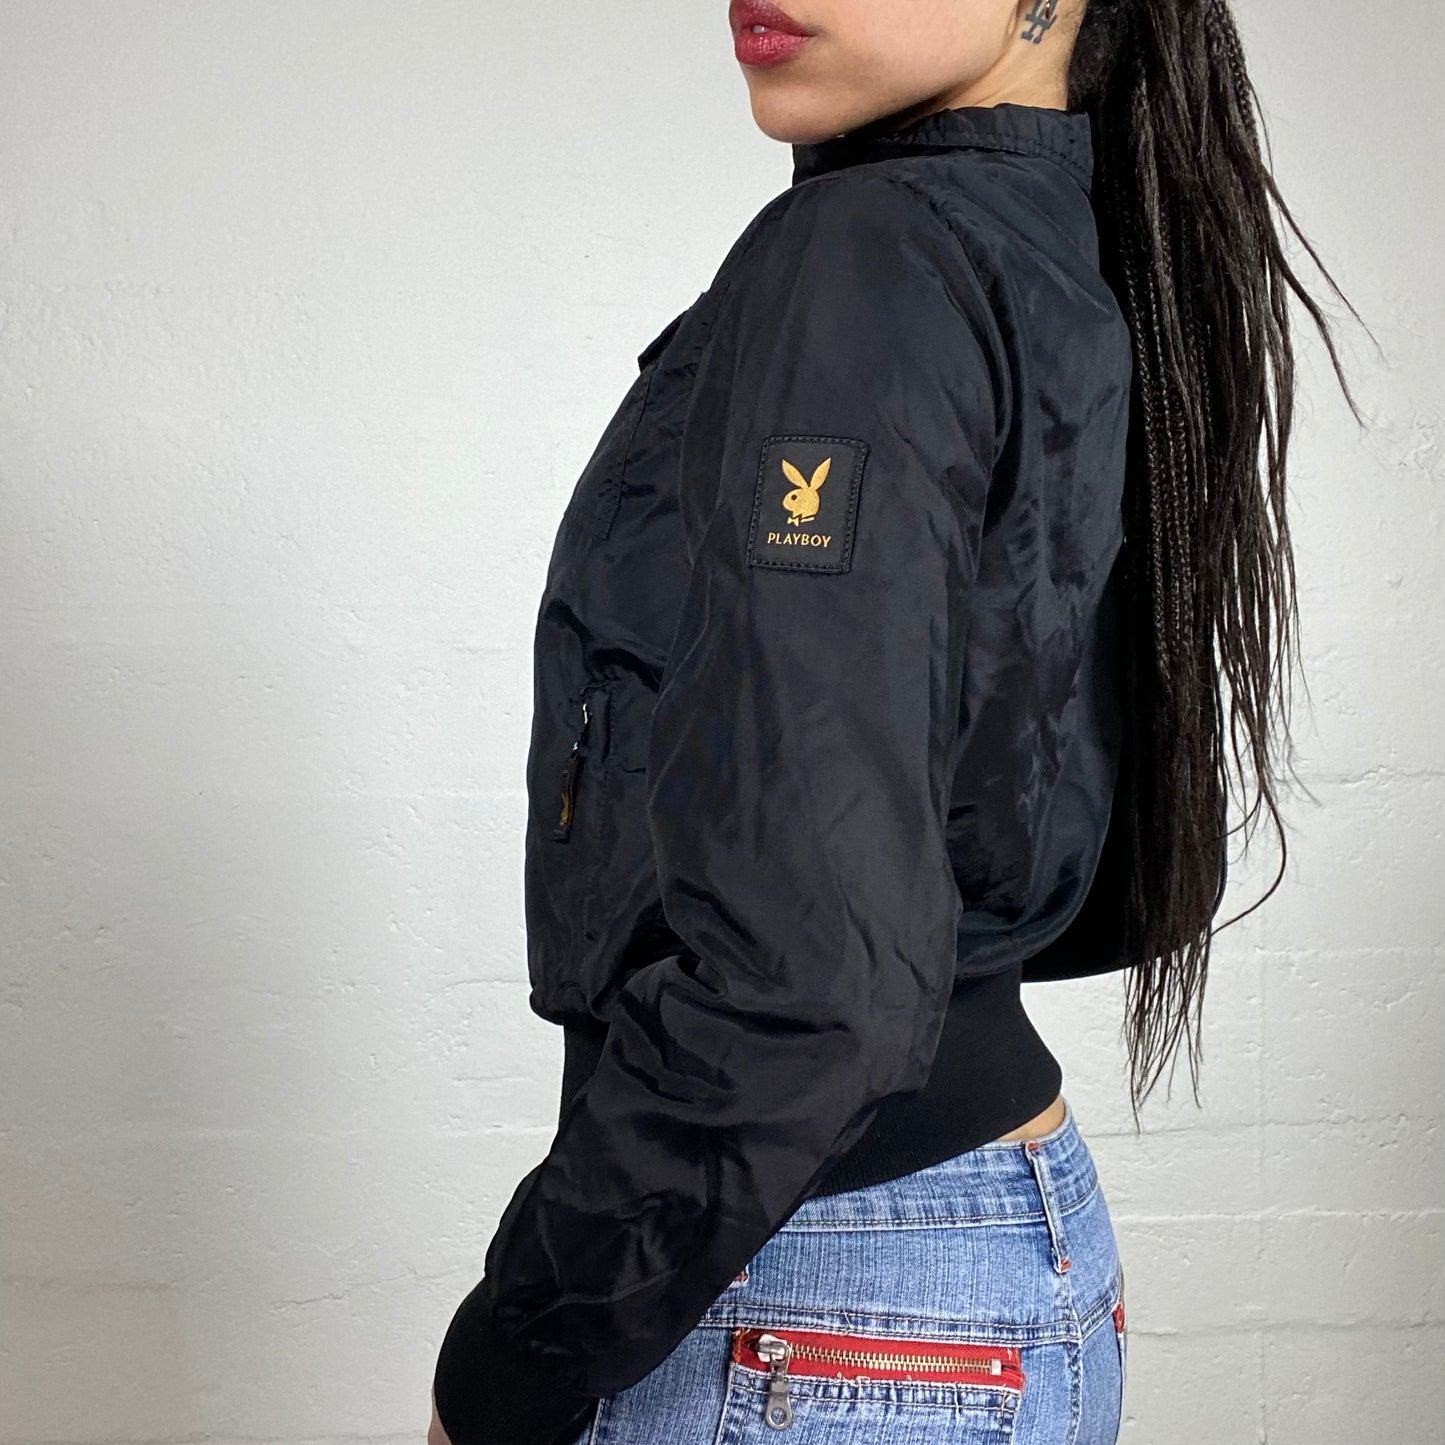 Vintage 90’s Archive Playboy Skater Girl Windbreaker Fitted Black Bomber Jacket with Sleeve Logo Embroidery (S)